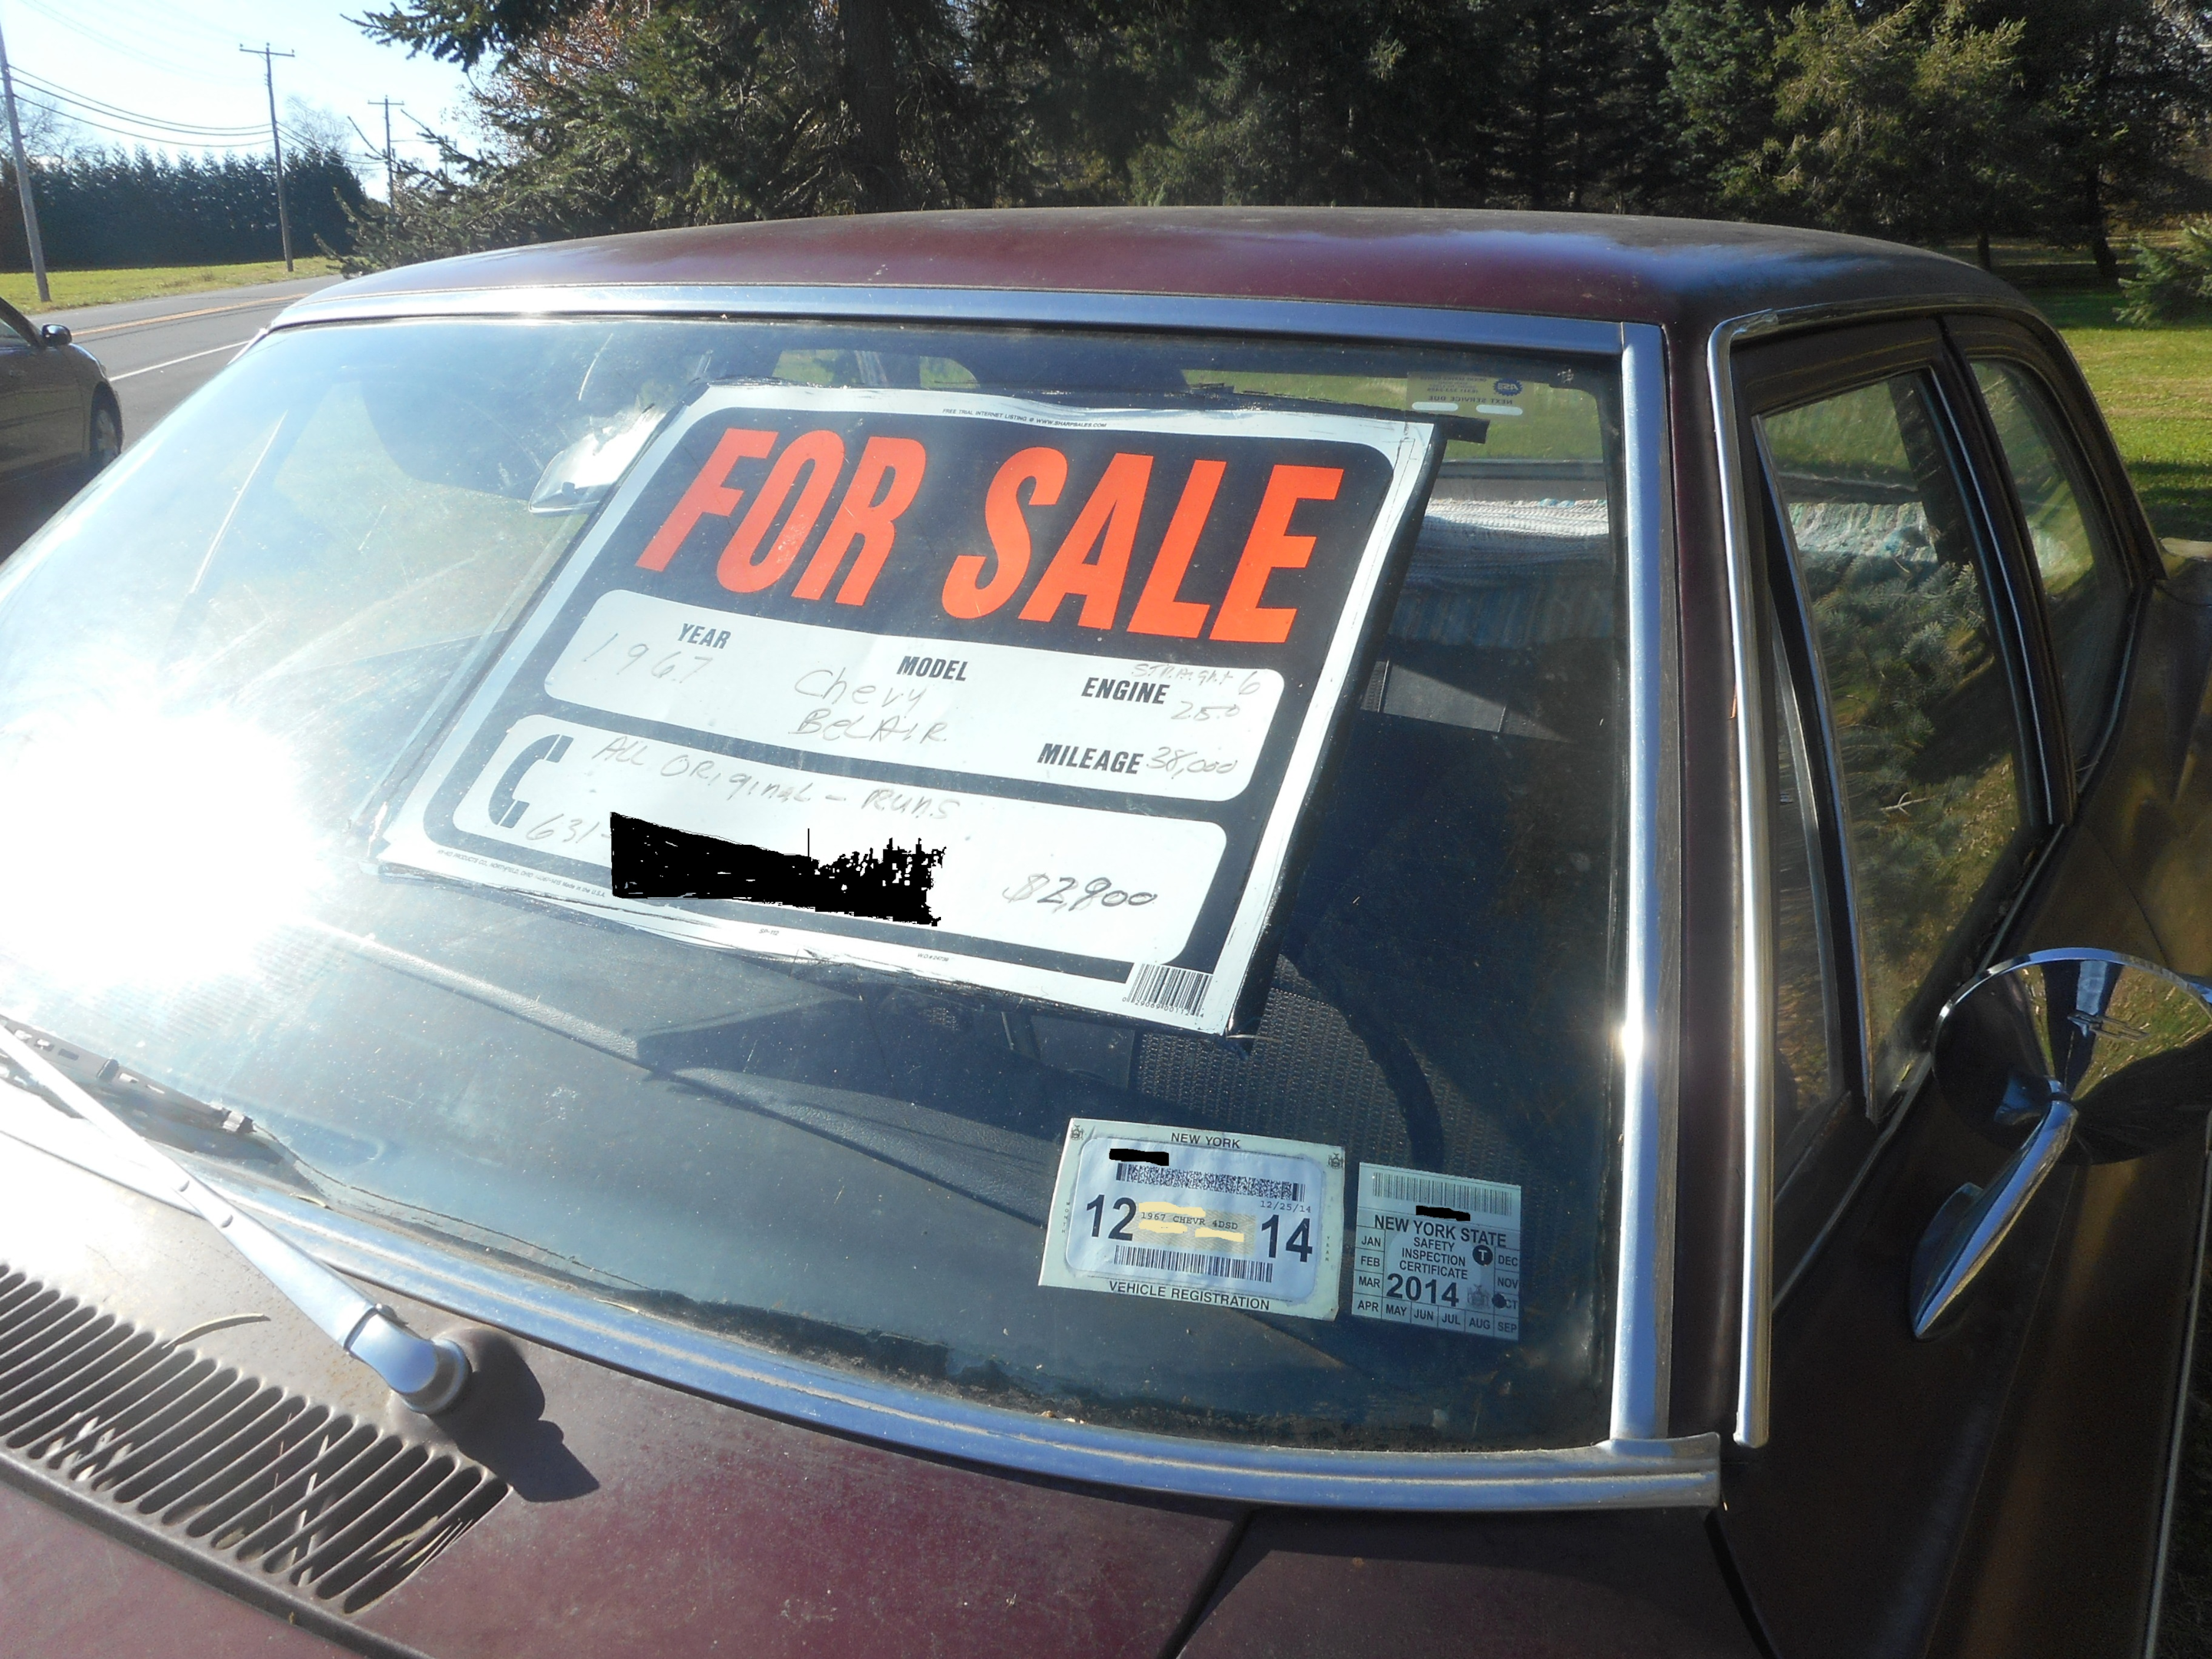 A car parked in front of a house with a "For Sale" sign on it